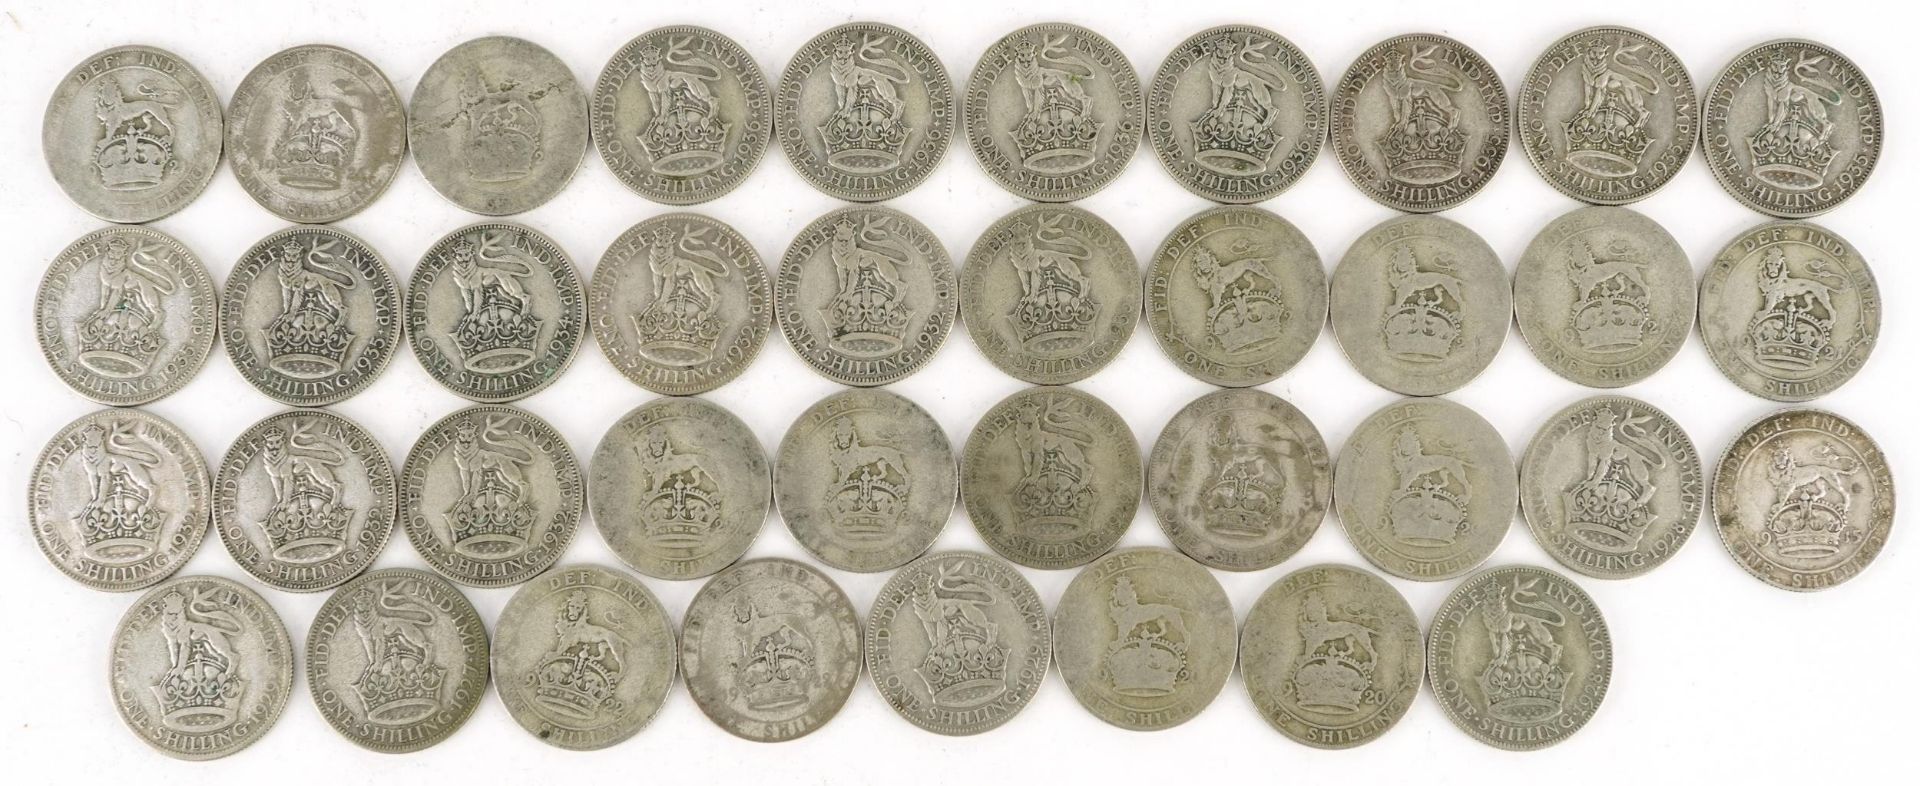 British pre 1947 shillings, 201g : For further information on this lot please visit